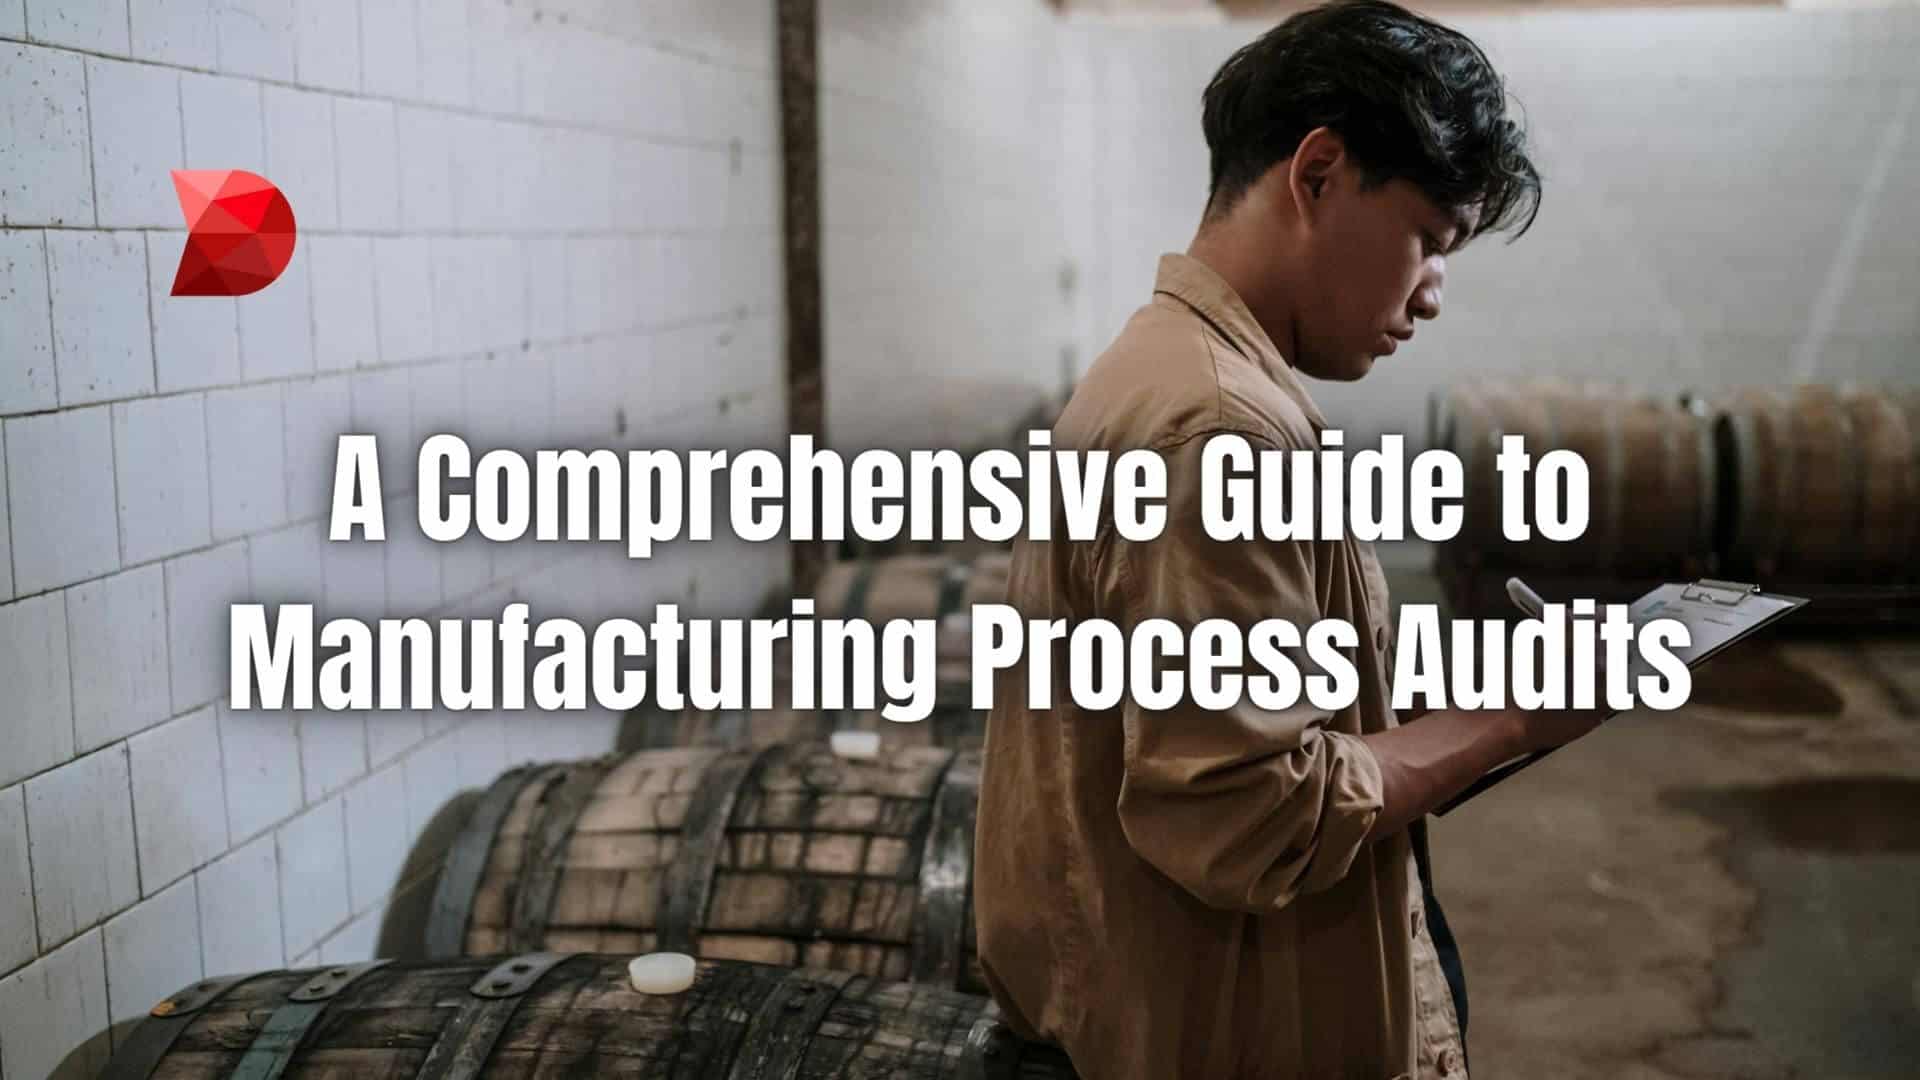 Optimize your manufacturing processes with our guide to process audits. Discover effective techniques to improve efficiency and quality.